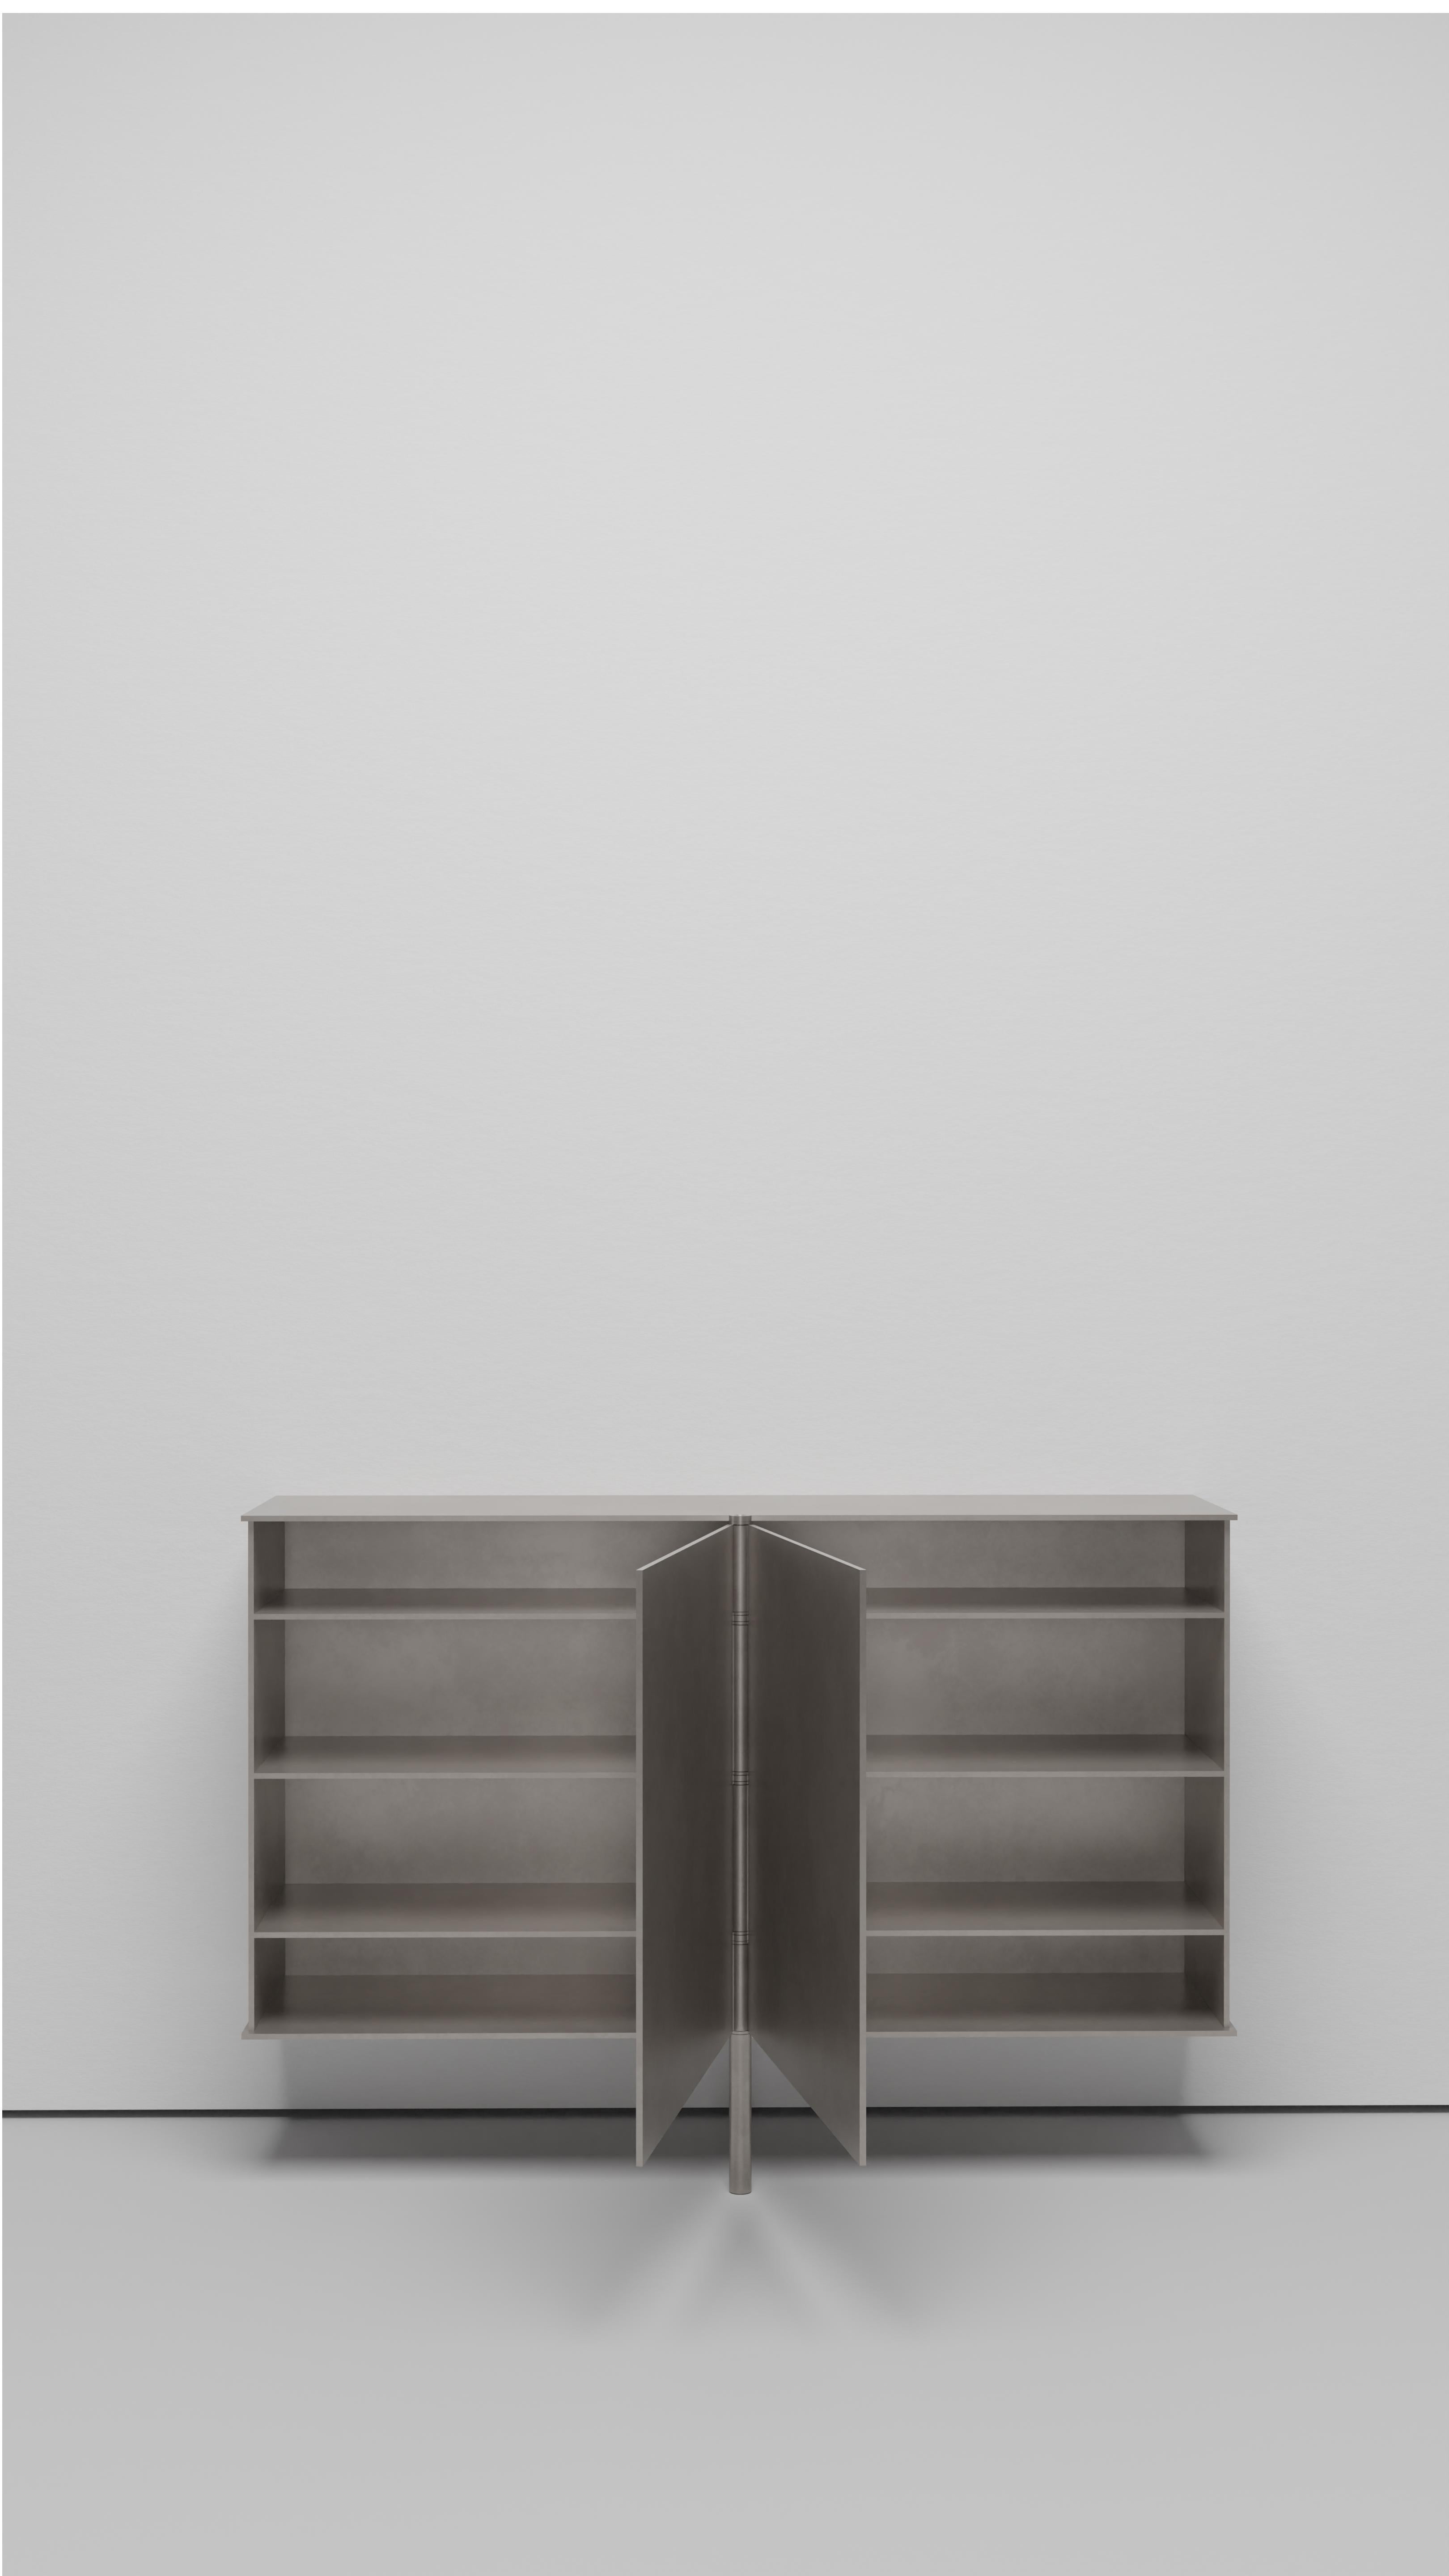 Minimalist Board Game Cabinet Wall Mounted Shelf in Waxed Aluminum Plate by Jonathan Nesci For Sale